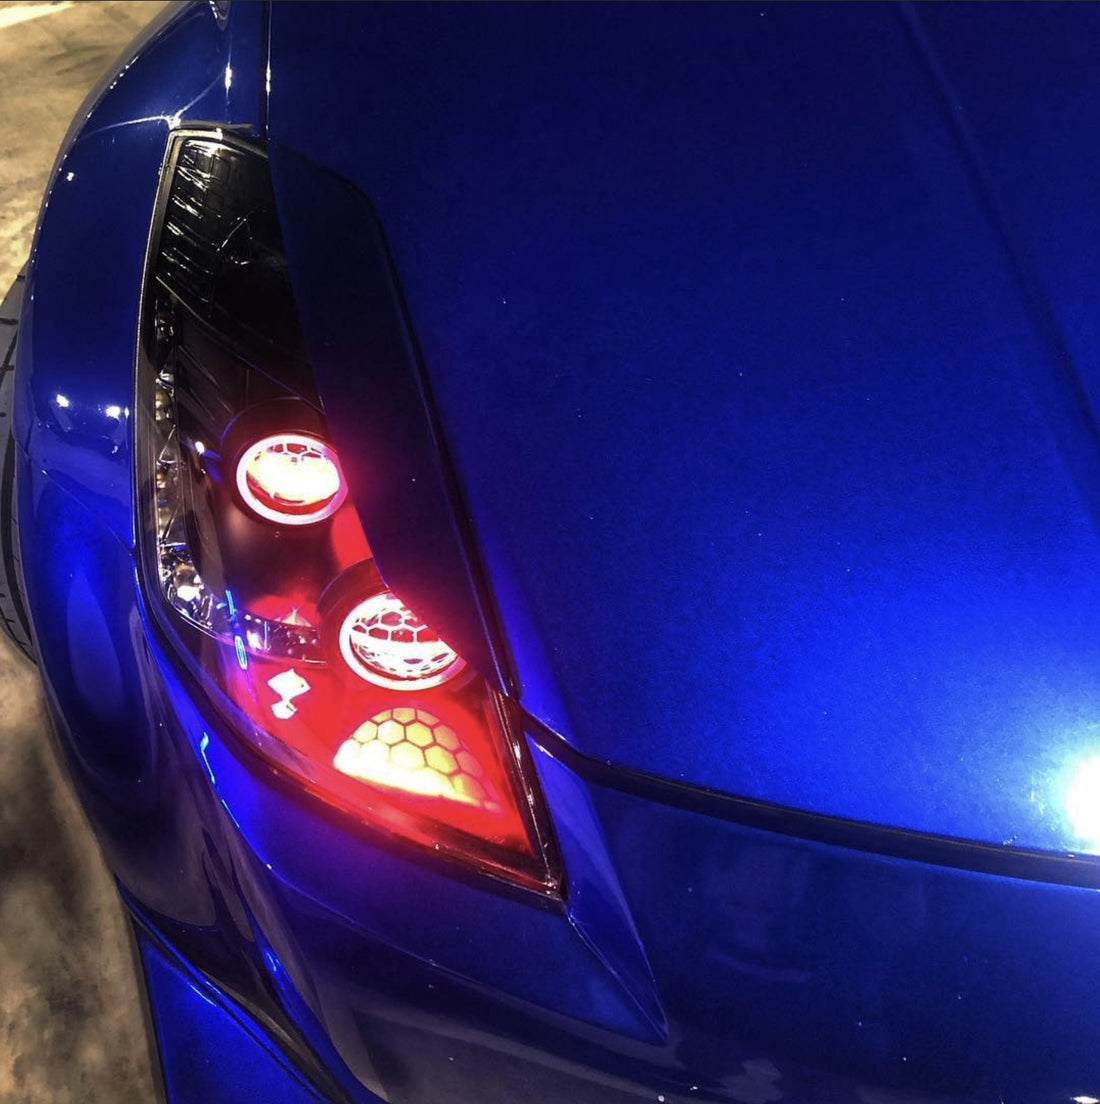 Nissan 350Z Headlights with Multicoloured Halo Rings, Demon Eyes and "Honeycomb" Projector Lens Etching